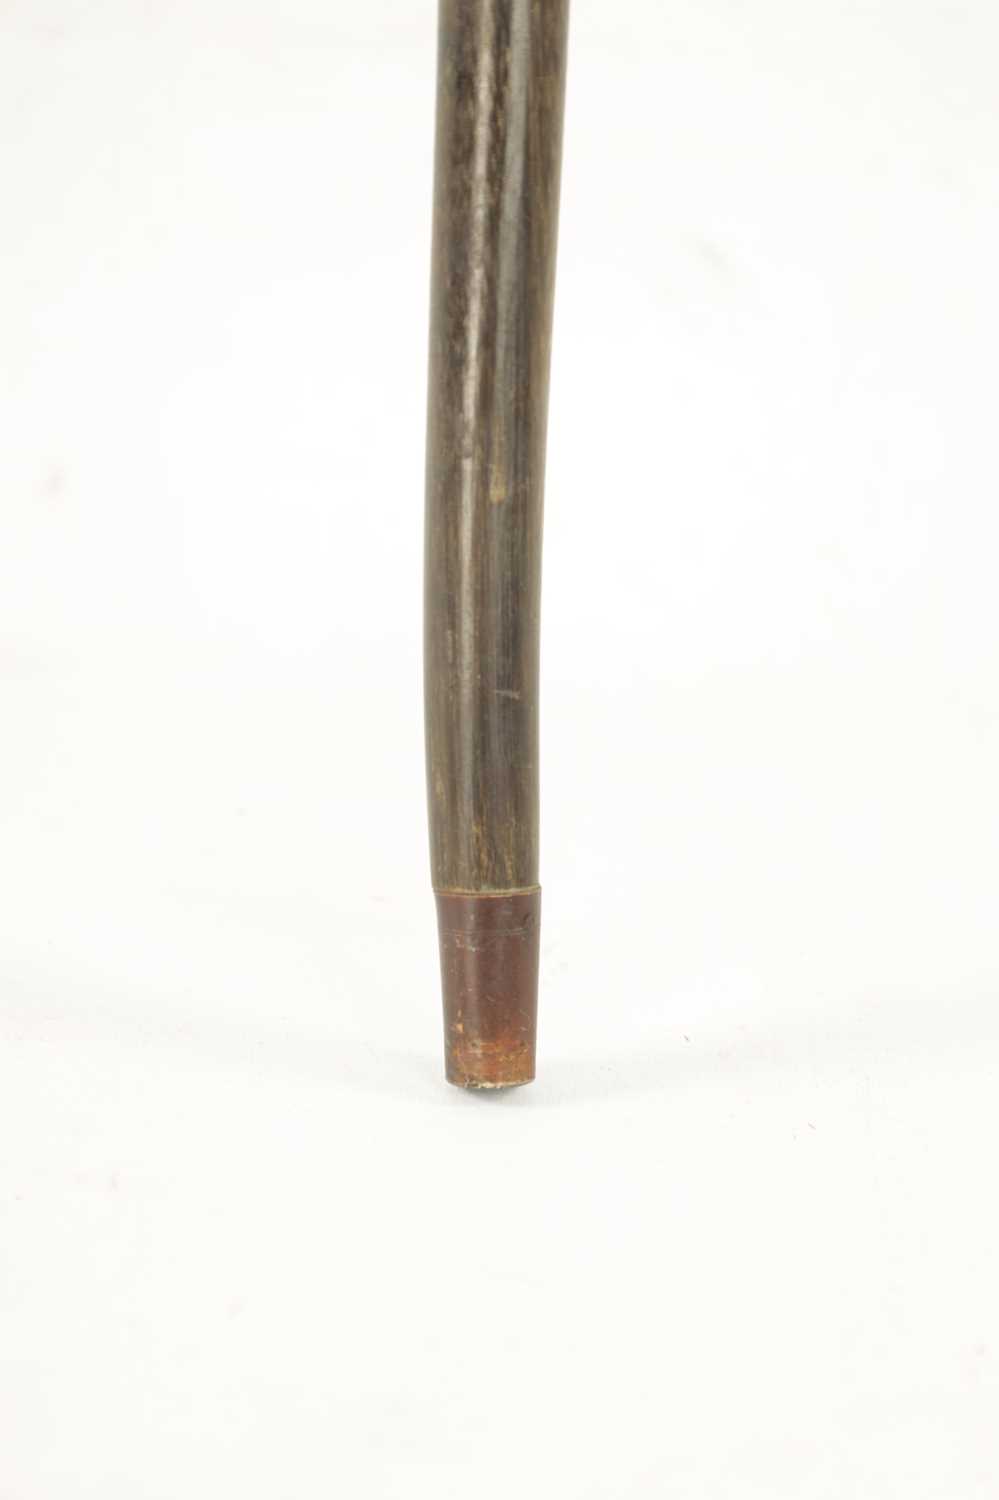 A LATE 19TH CENTURY RHINOCEROS HORN WALKING STICK - Image 4 of 11